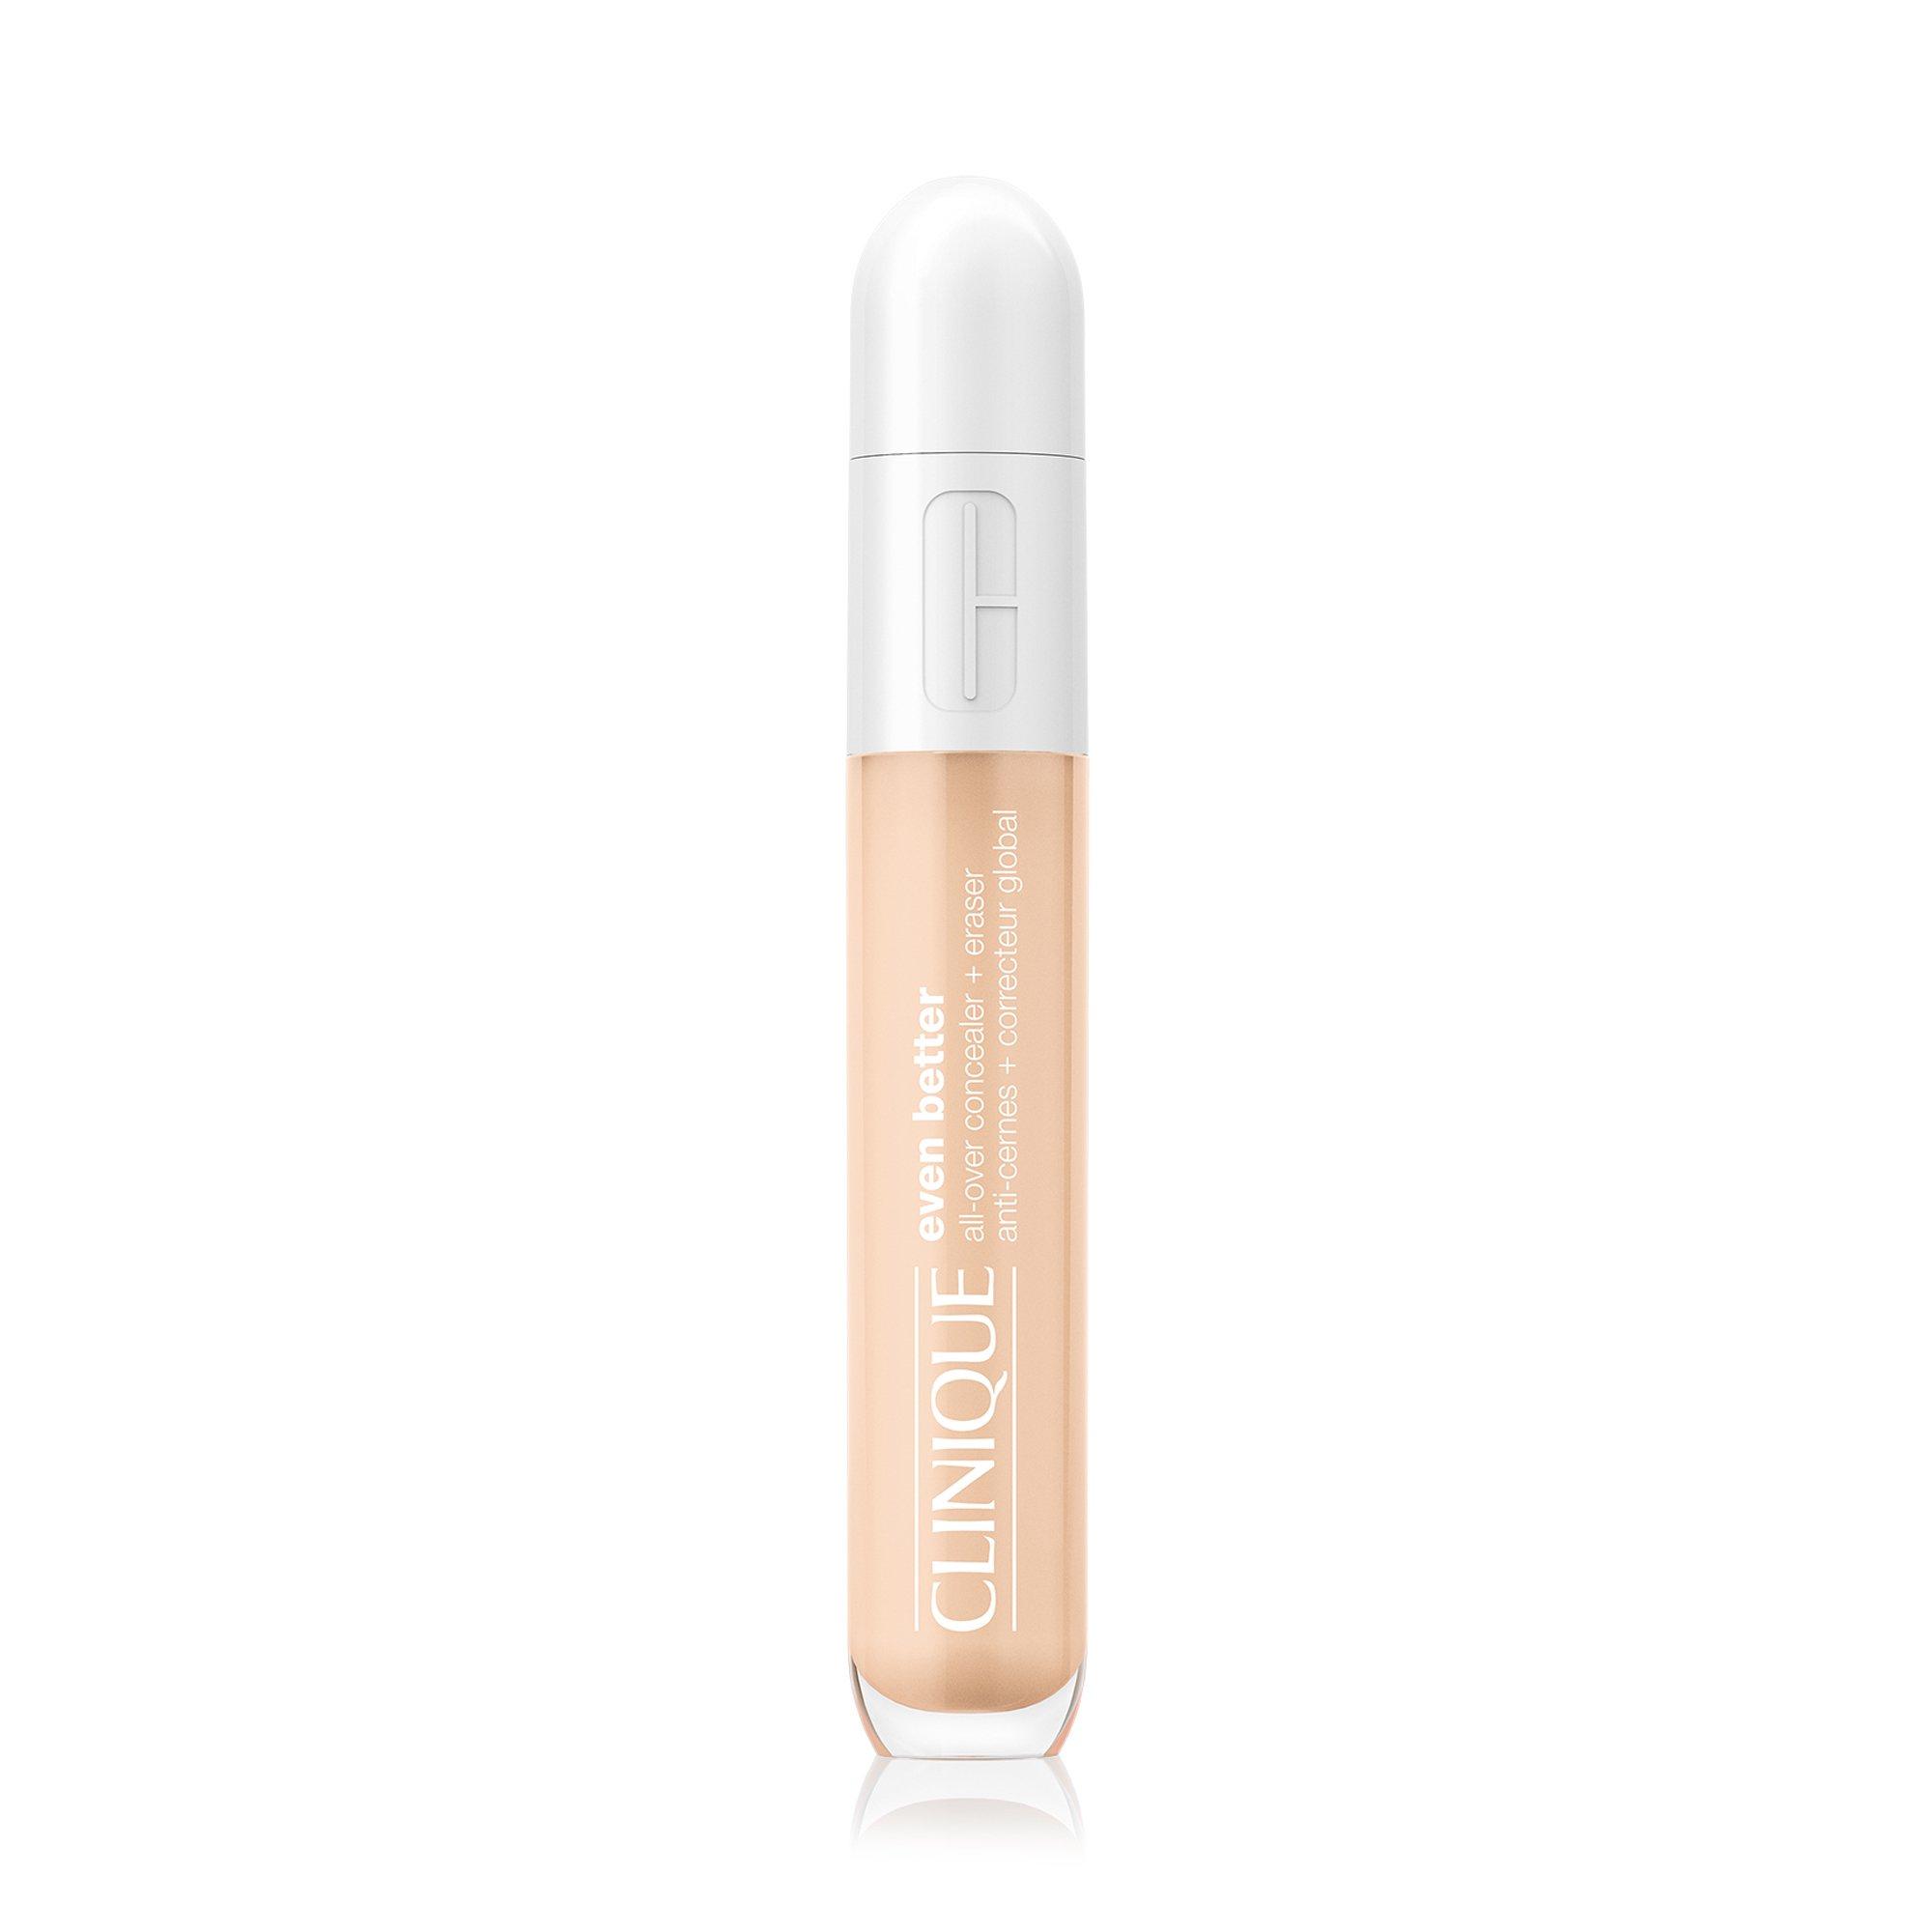 Image of CLINIQUE Even Better Concealer - 6ml